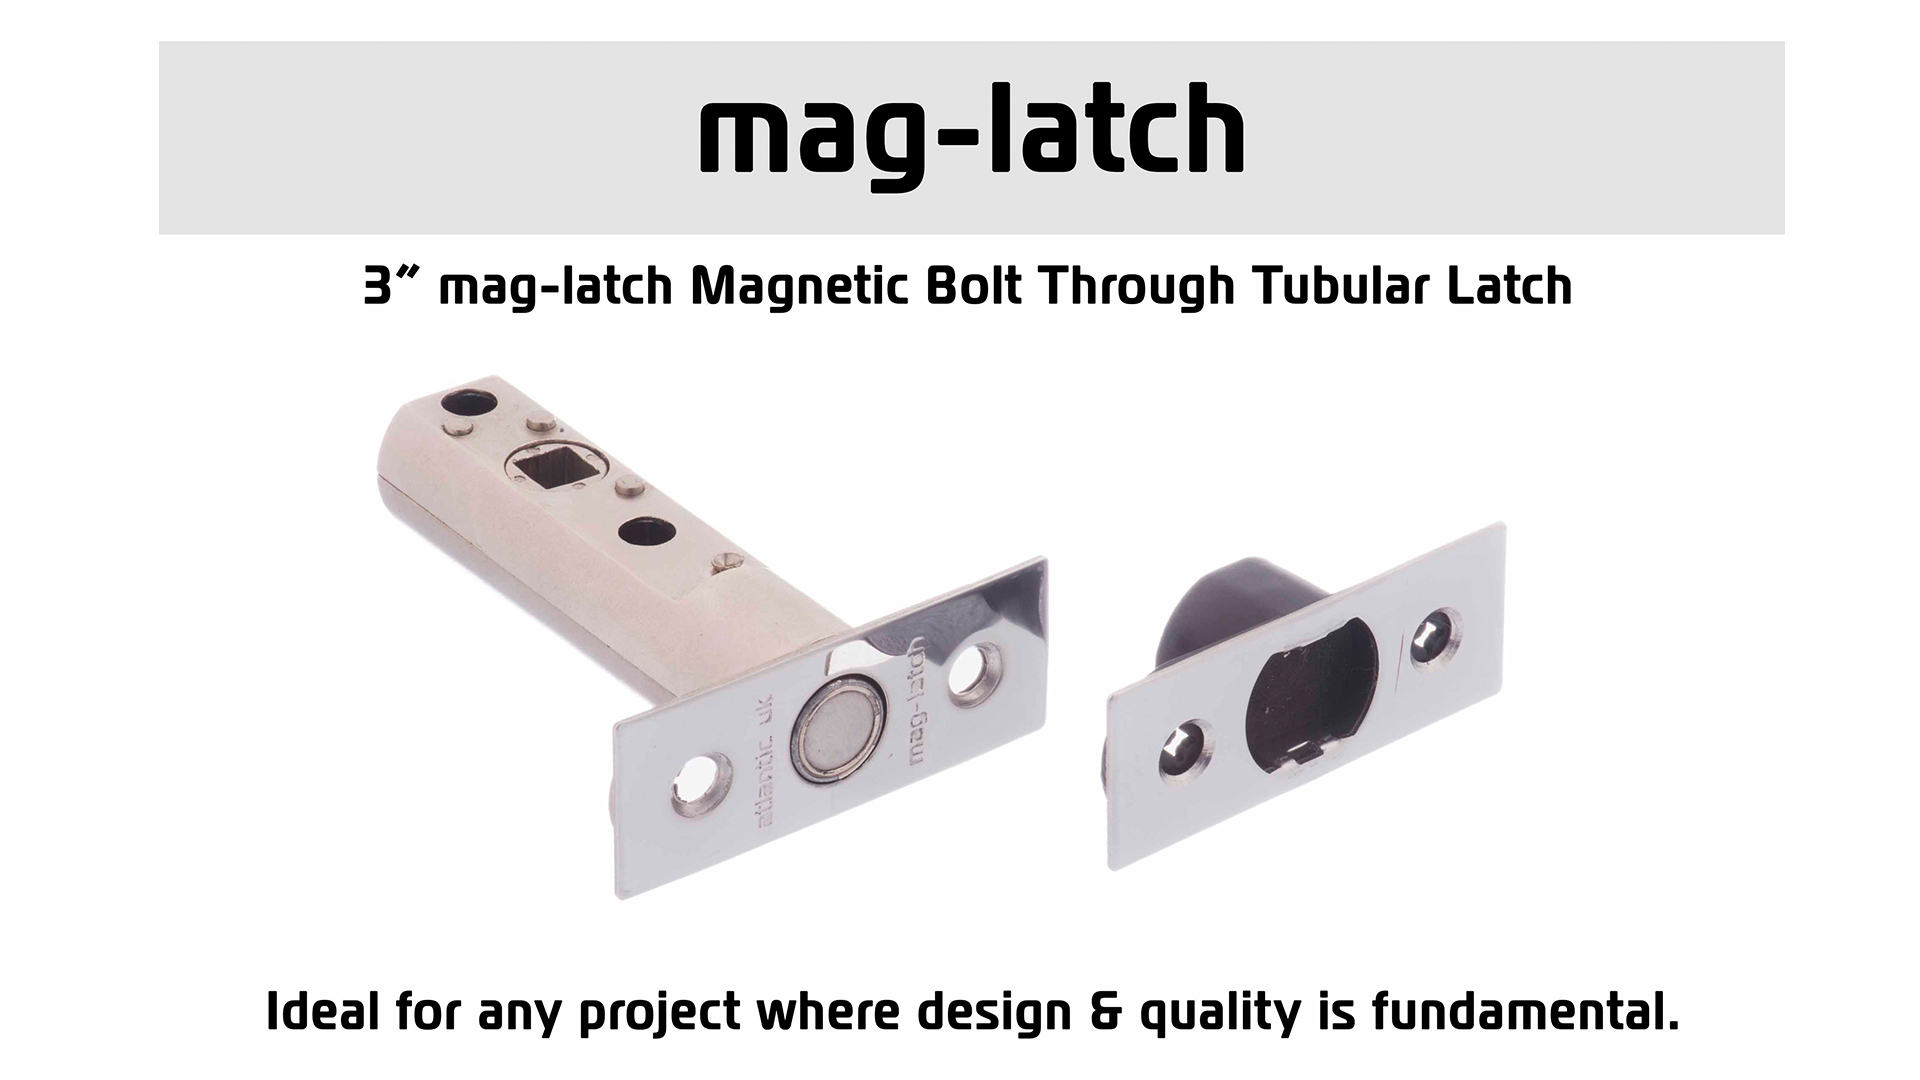 Why would you benefit from our mag-latches & mag-locks!